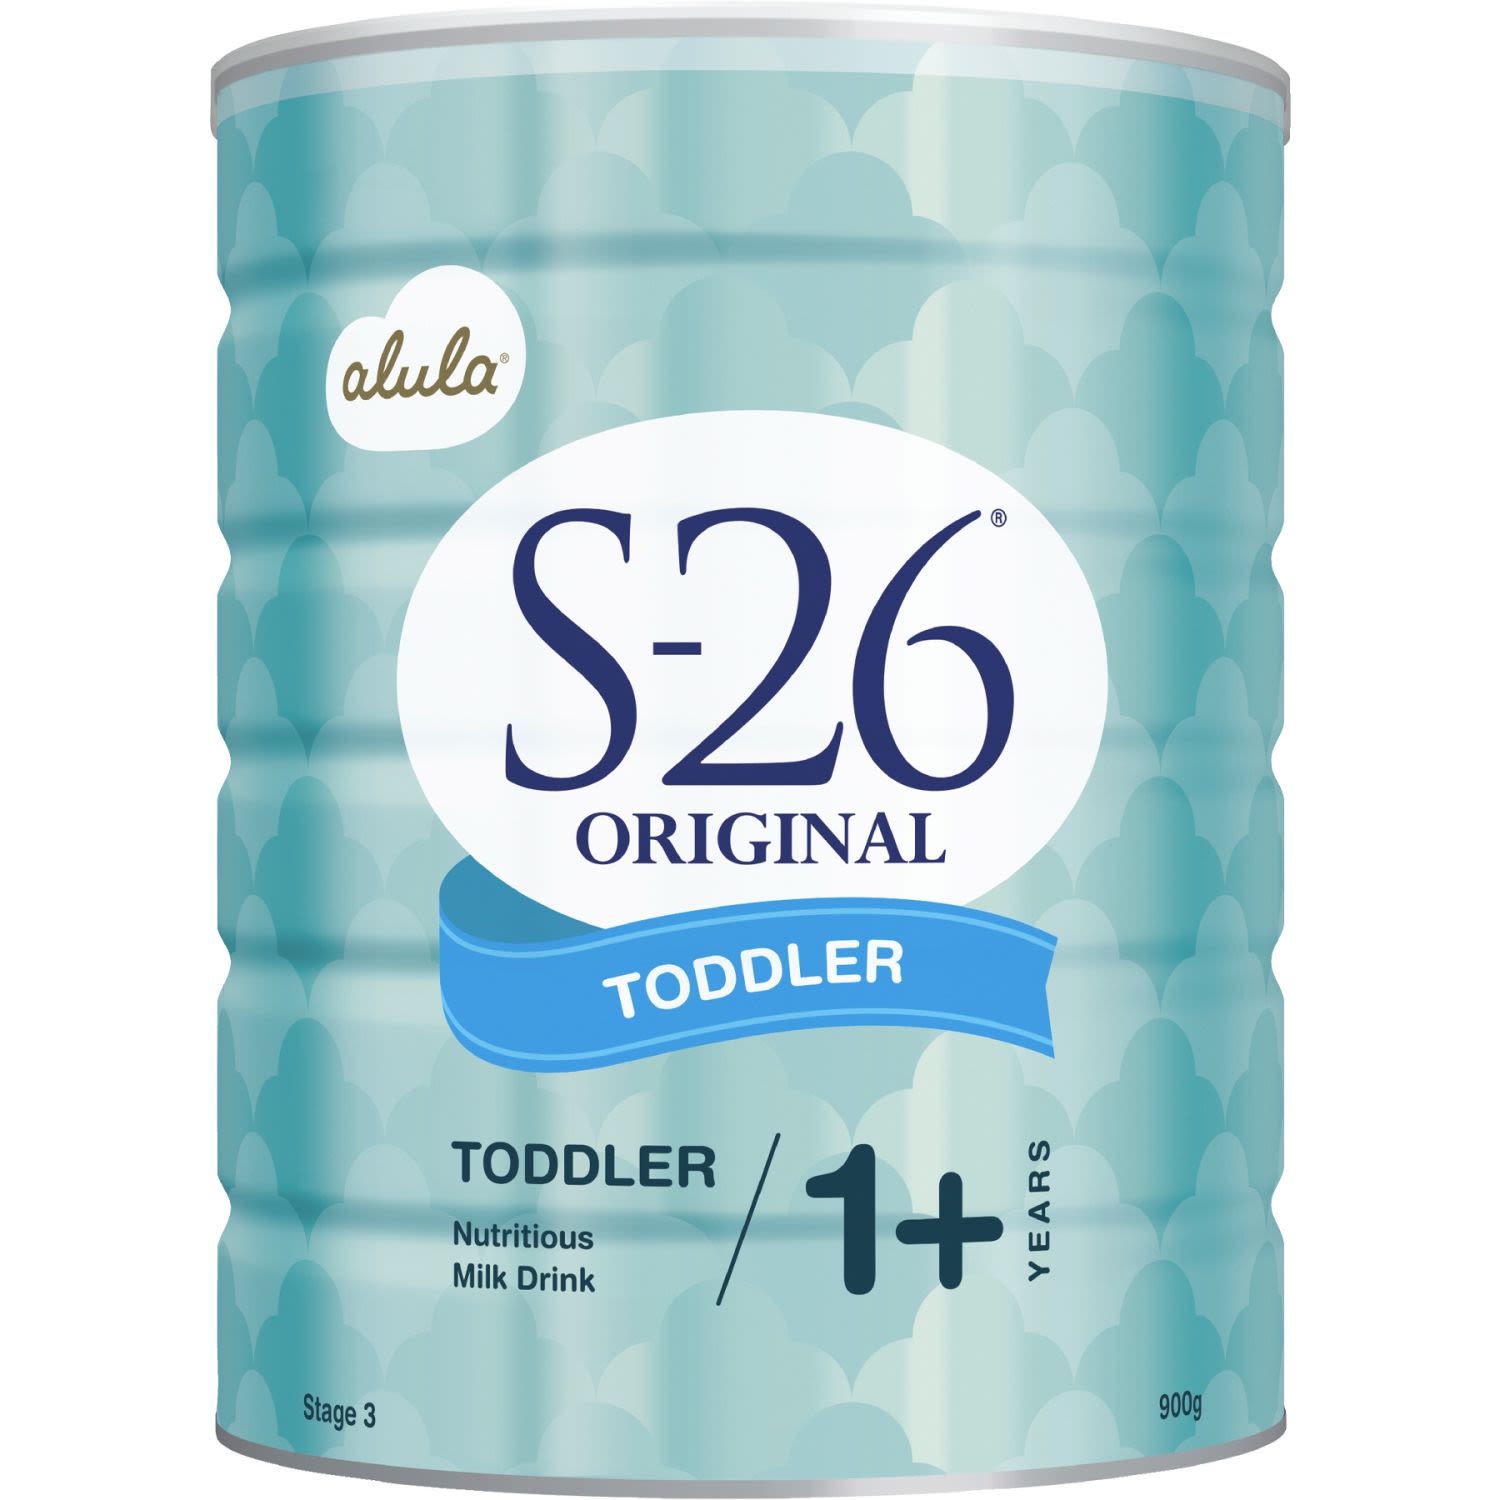 One serve of S-26 Alula Original Toddler nutritious milk drink provides 50% of the RDI† for 10 age-appropriate vitamins and minerals, including iron and Vitamin C, to help support toddler’s growth and development, as part of a varied diet.
<br /> <br /> <br /><br />Country of Origin: Mexico